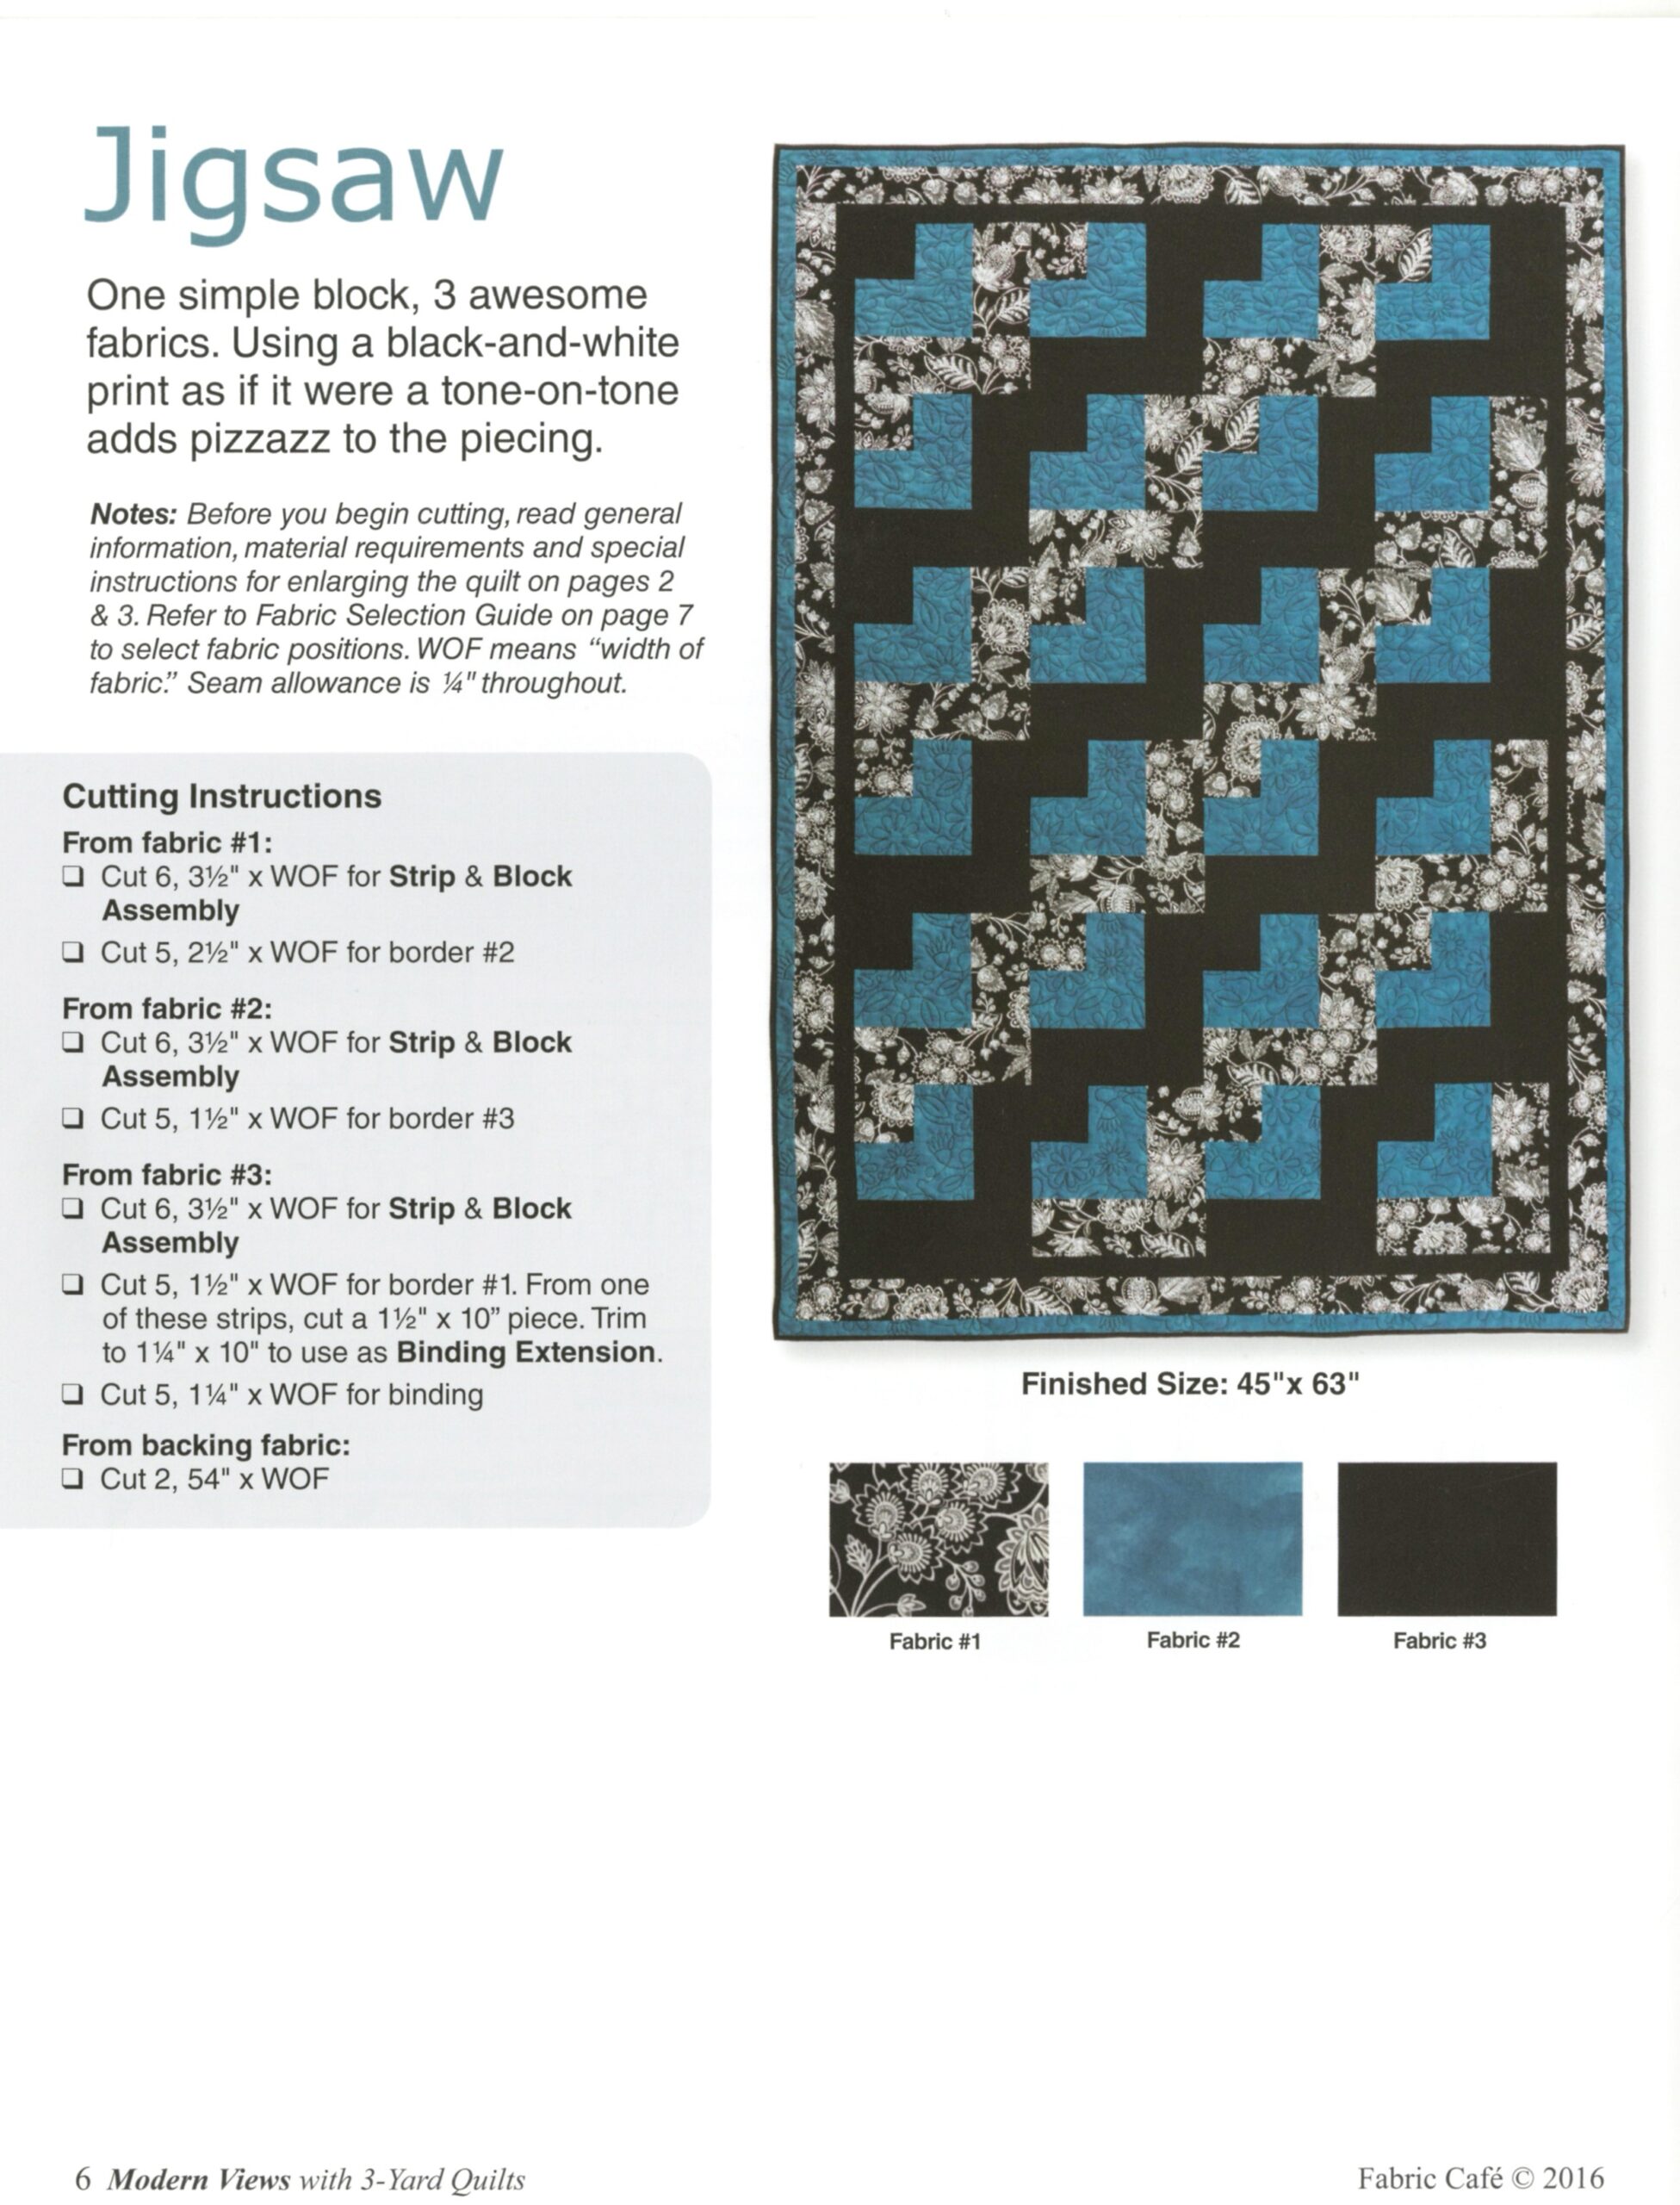 Checkmate Quilt Pattern by Fabric Cafe 850029306276 - Quilt in a Day  Patterns